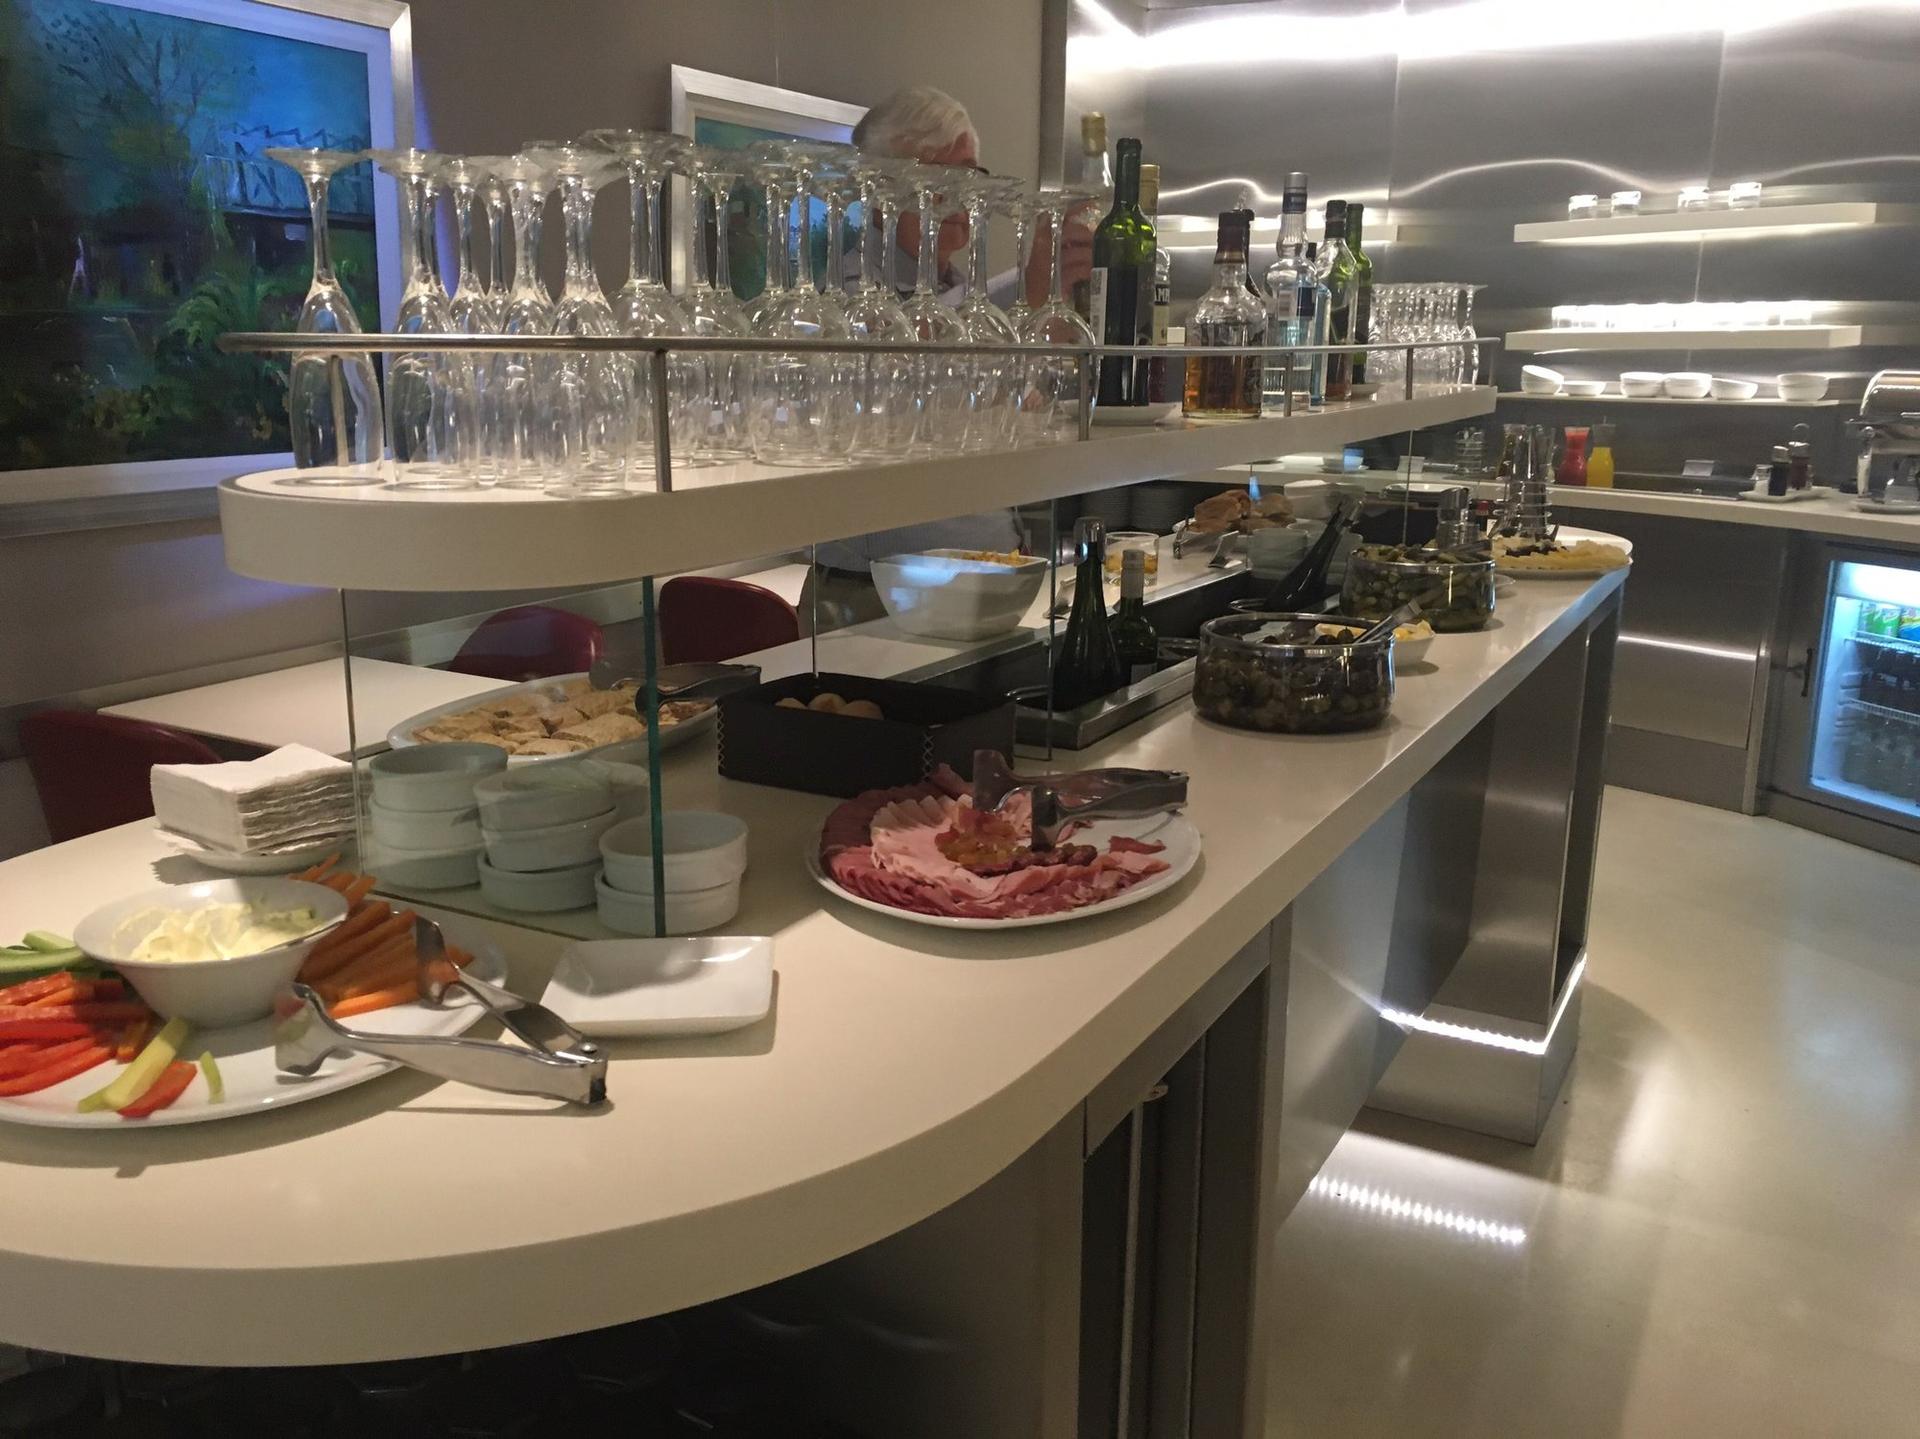 American Airlines Admirals Club & Iberia VIP Lounge image 10 of 18